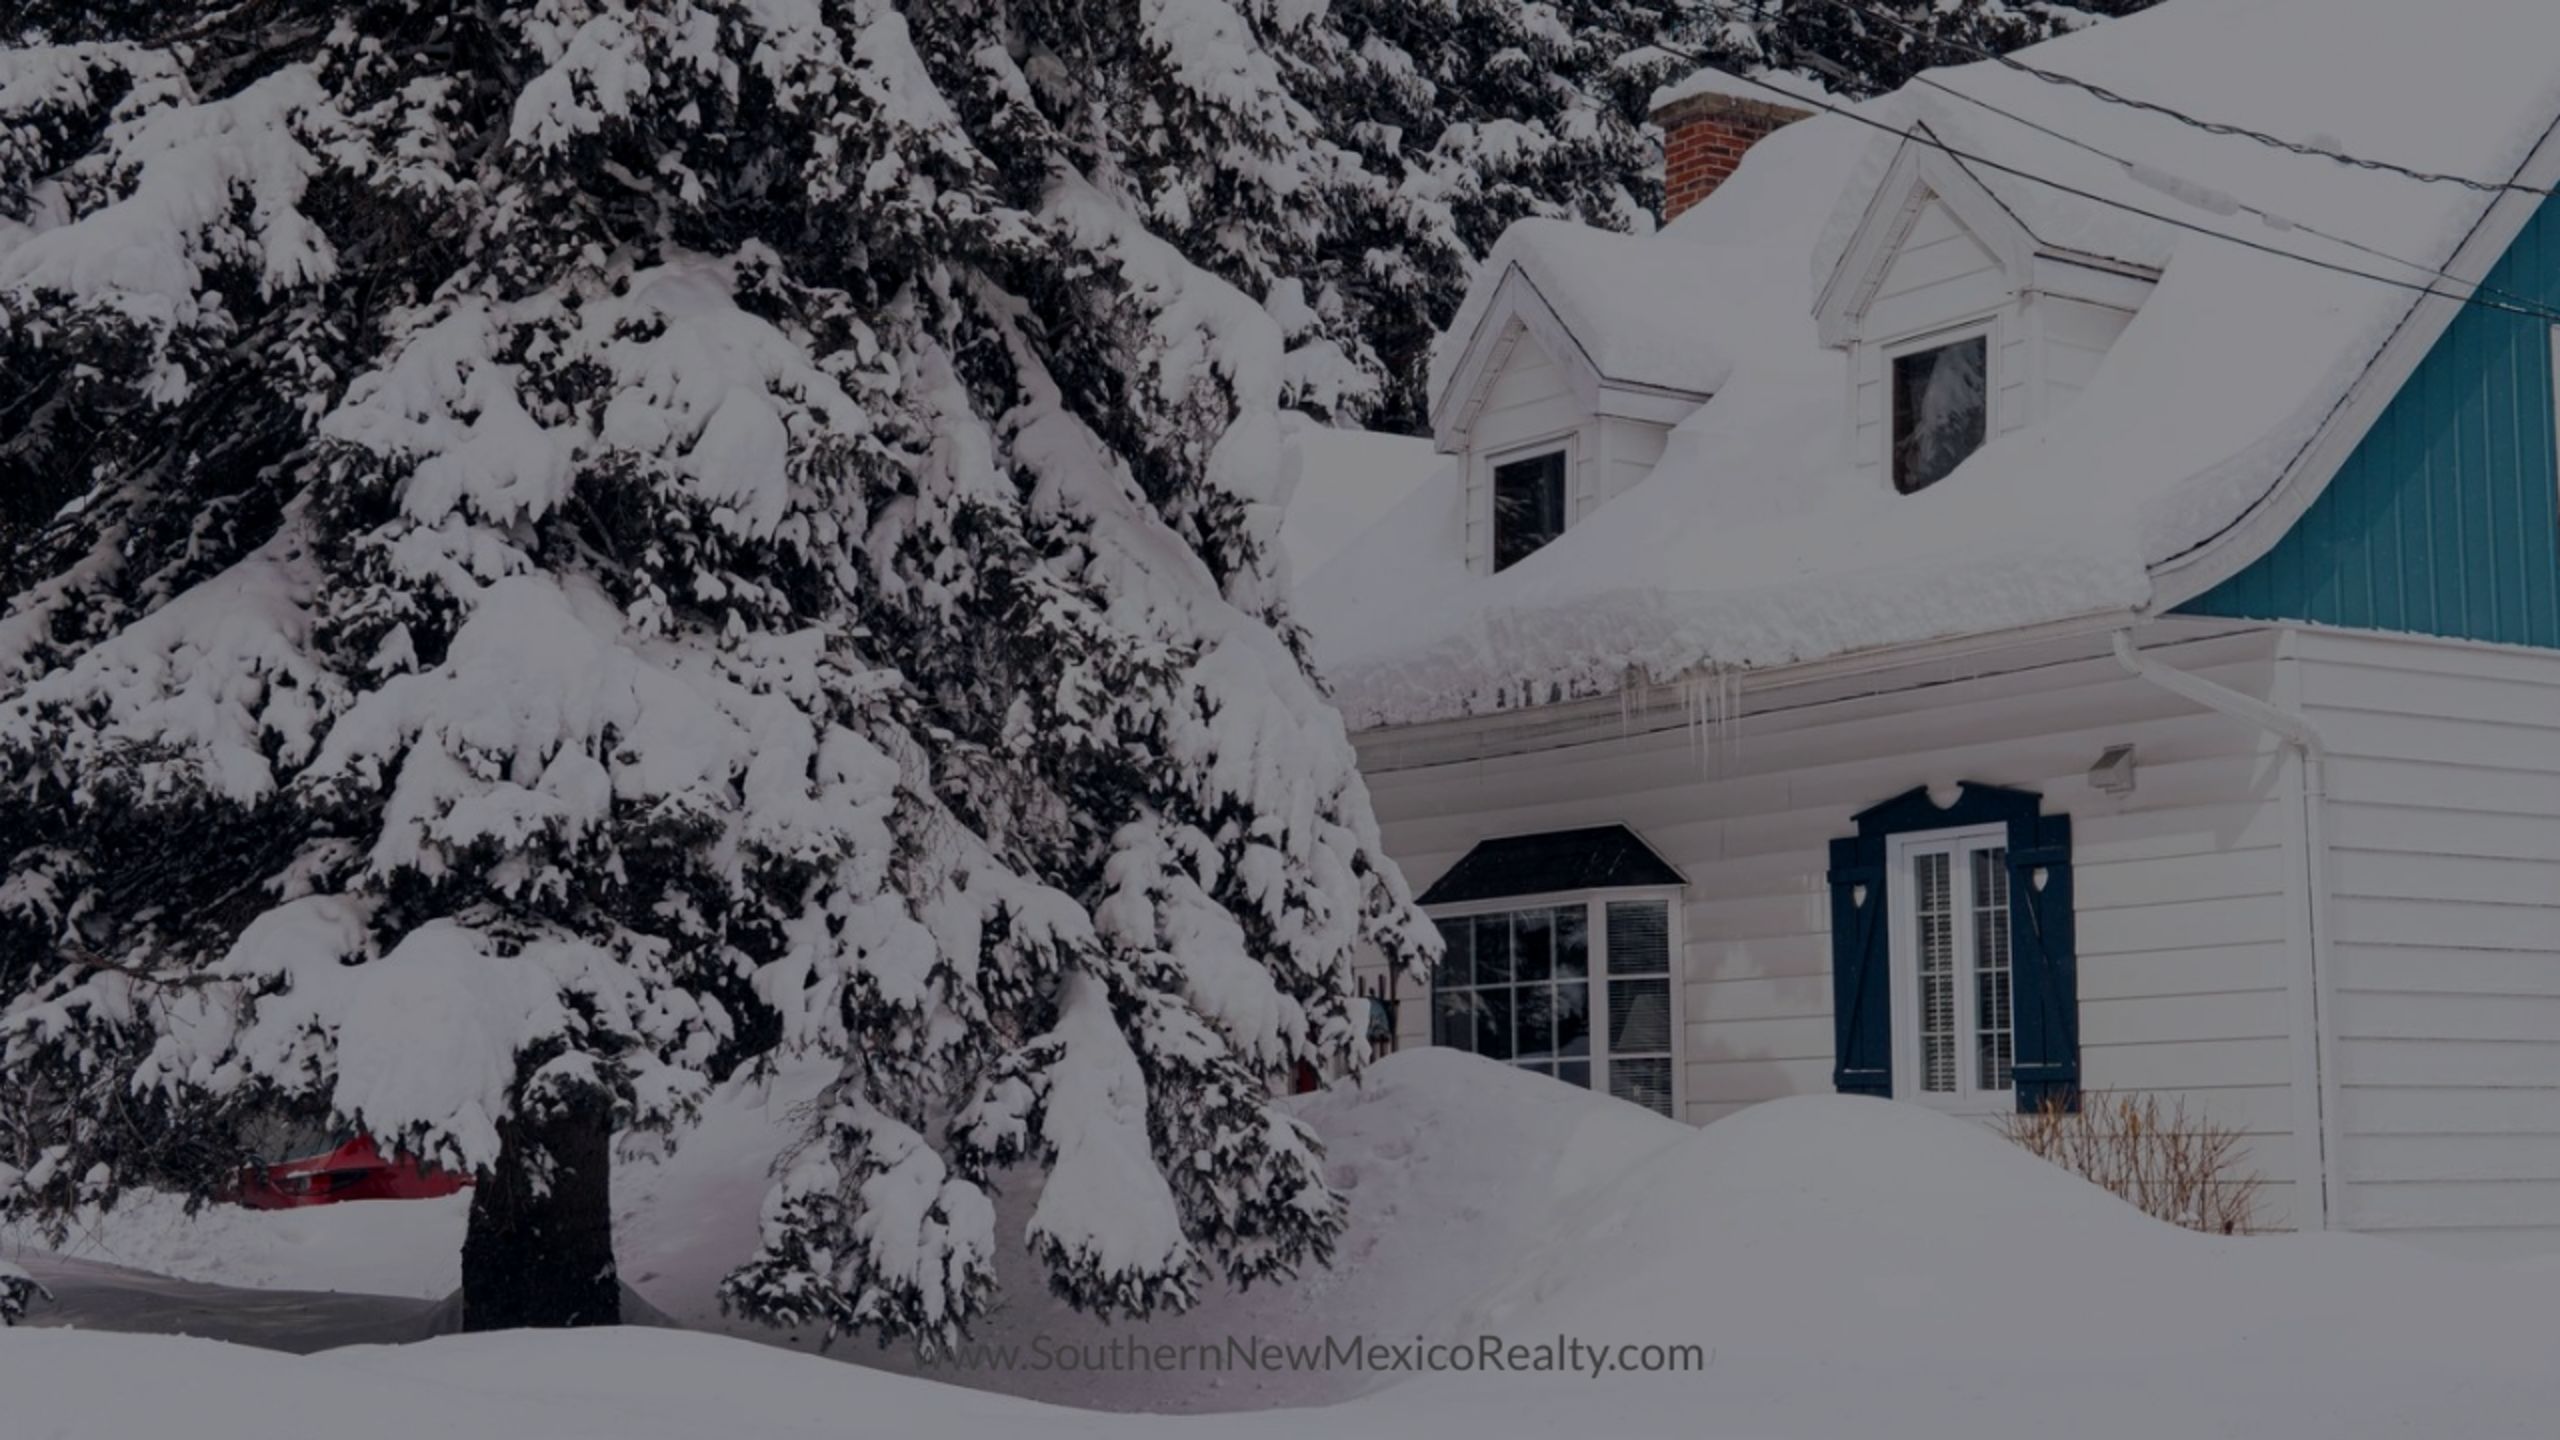 8 Tips That Will Sell Your House During the Winter